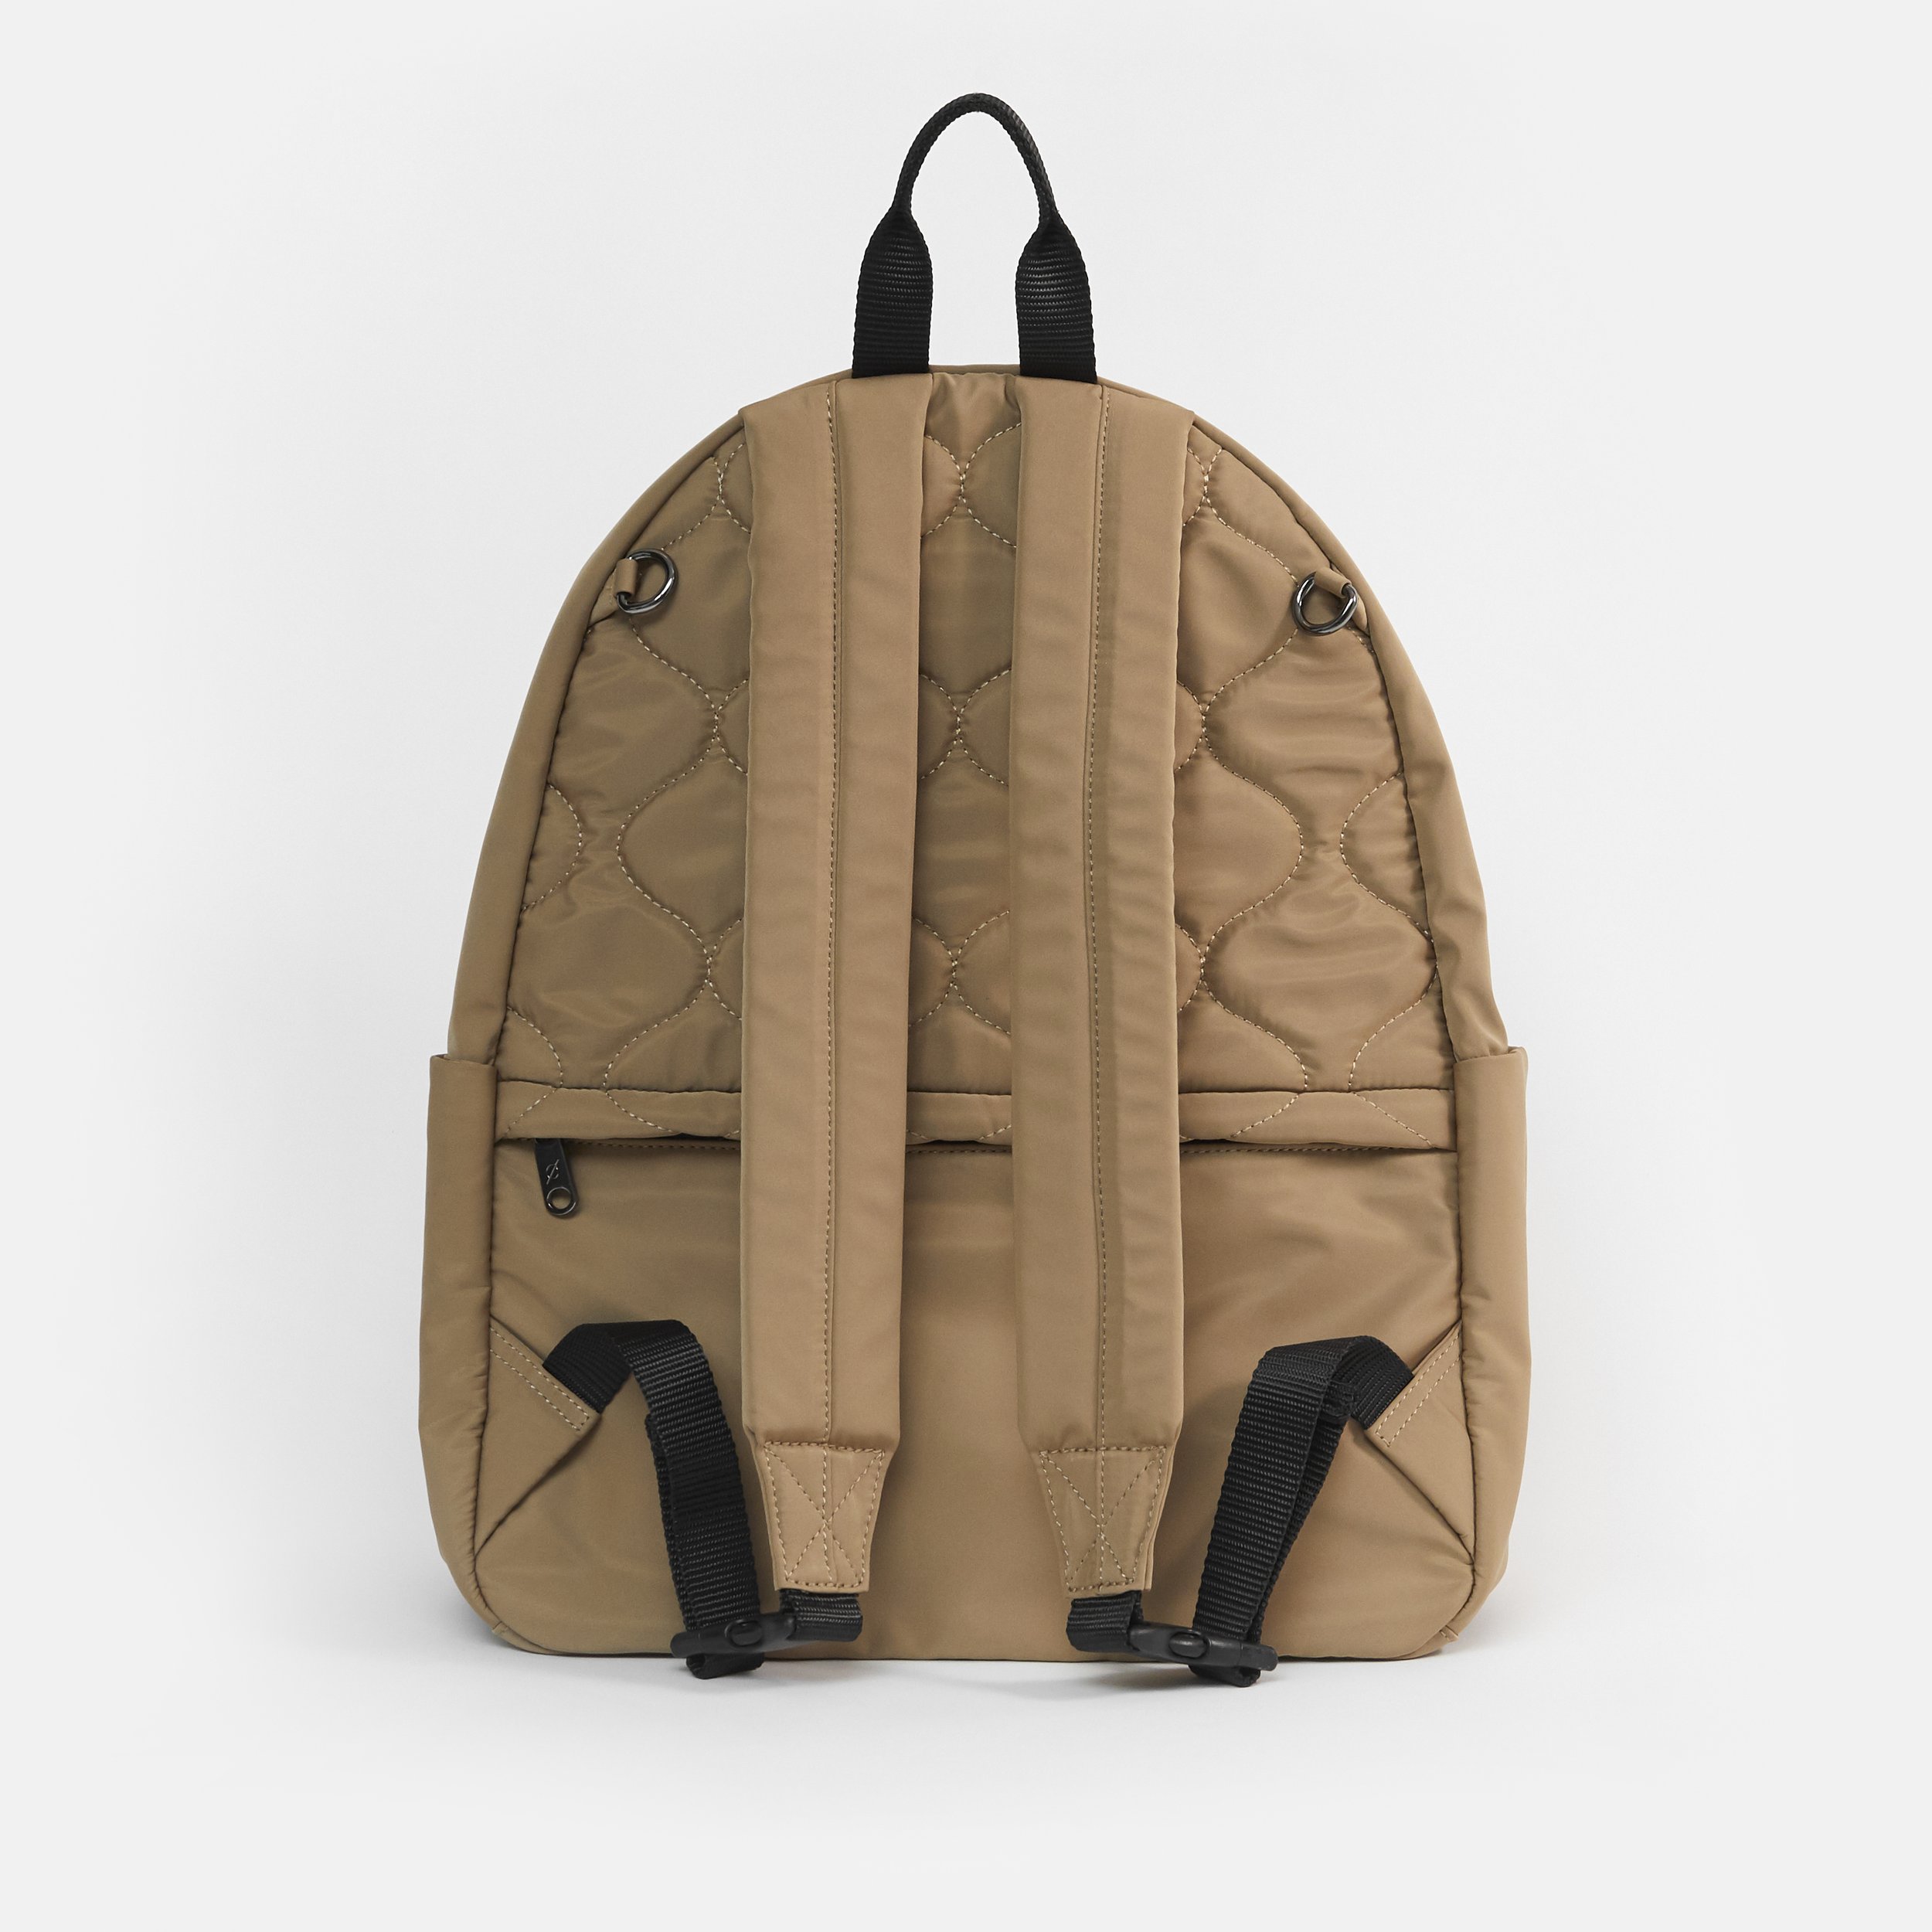 FINNSON ANA Eco Changing Backpack-CAMEL 2.jpg